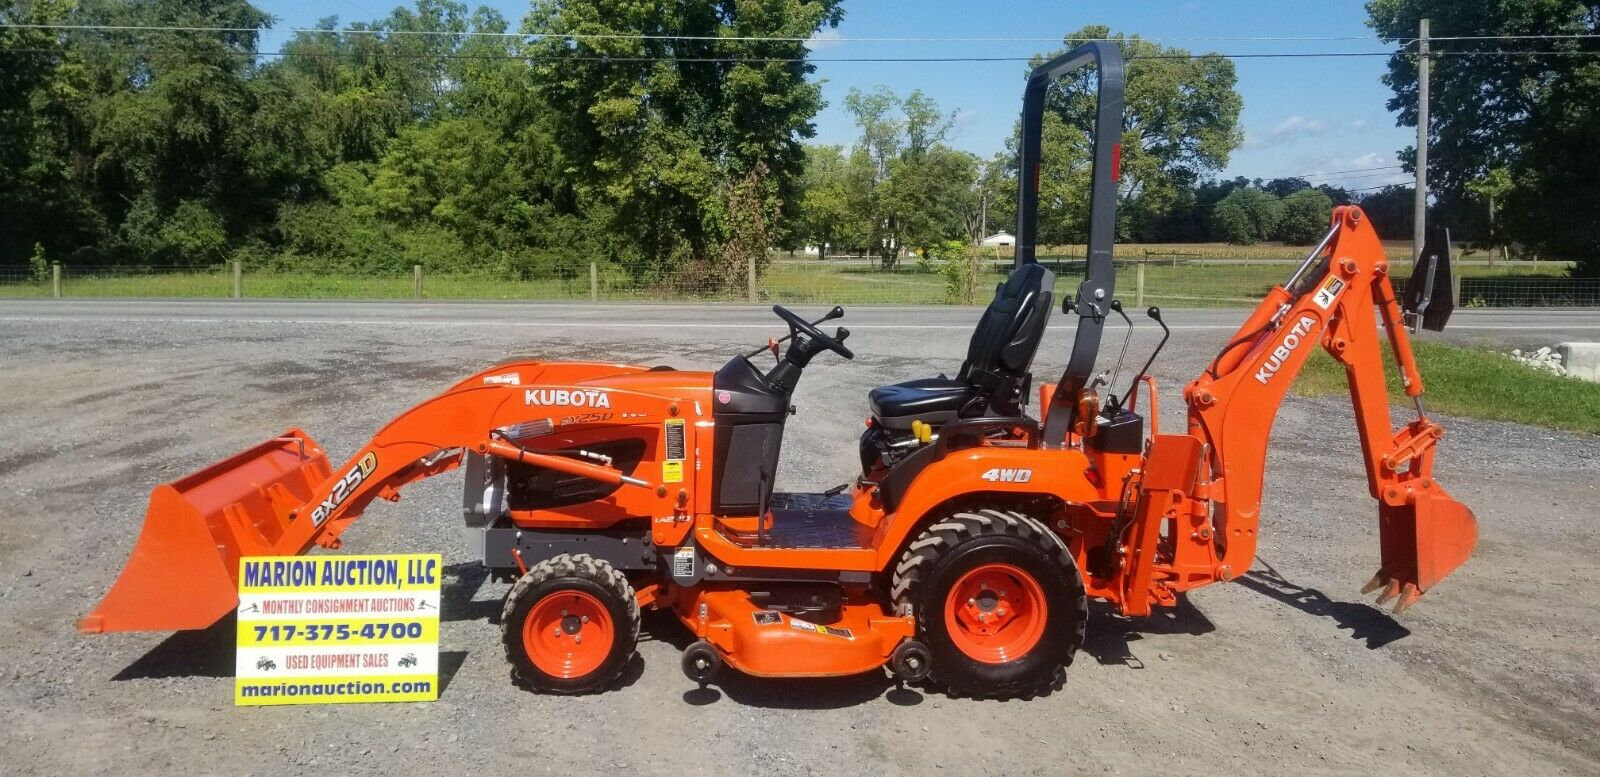 2016 Kubota Bx25dlb Compact Used Tractors For Sale